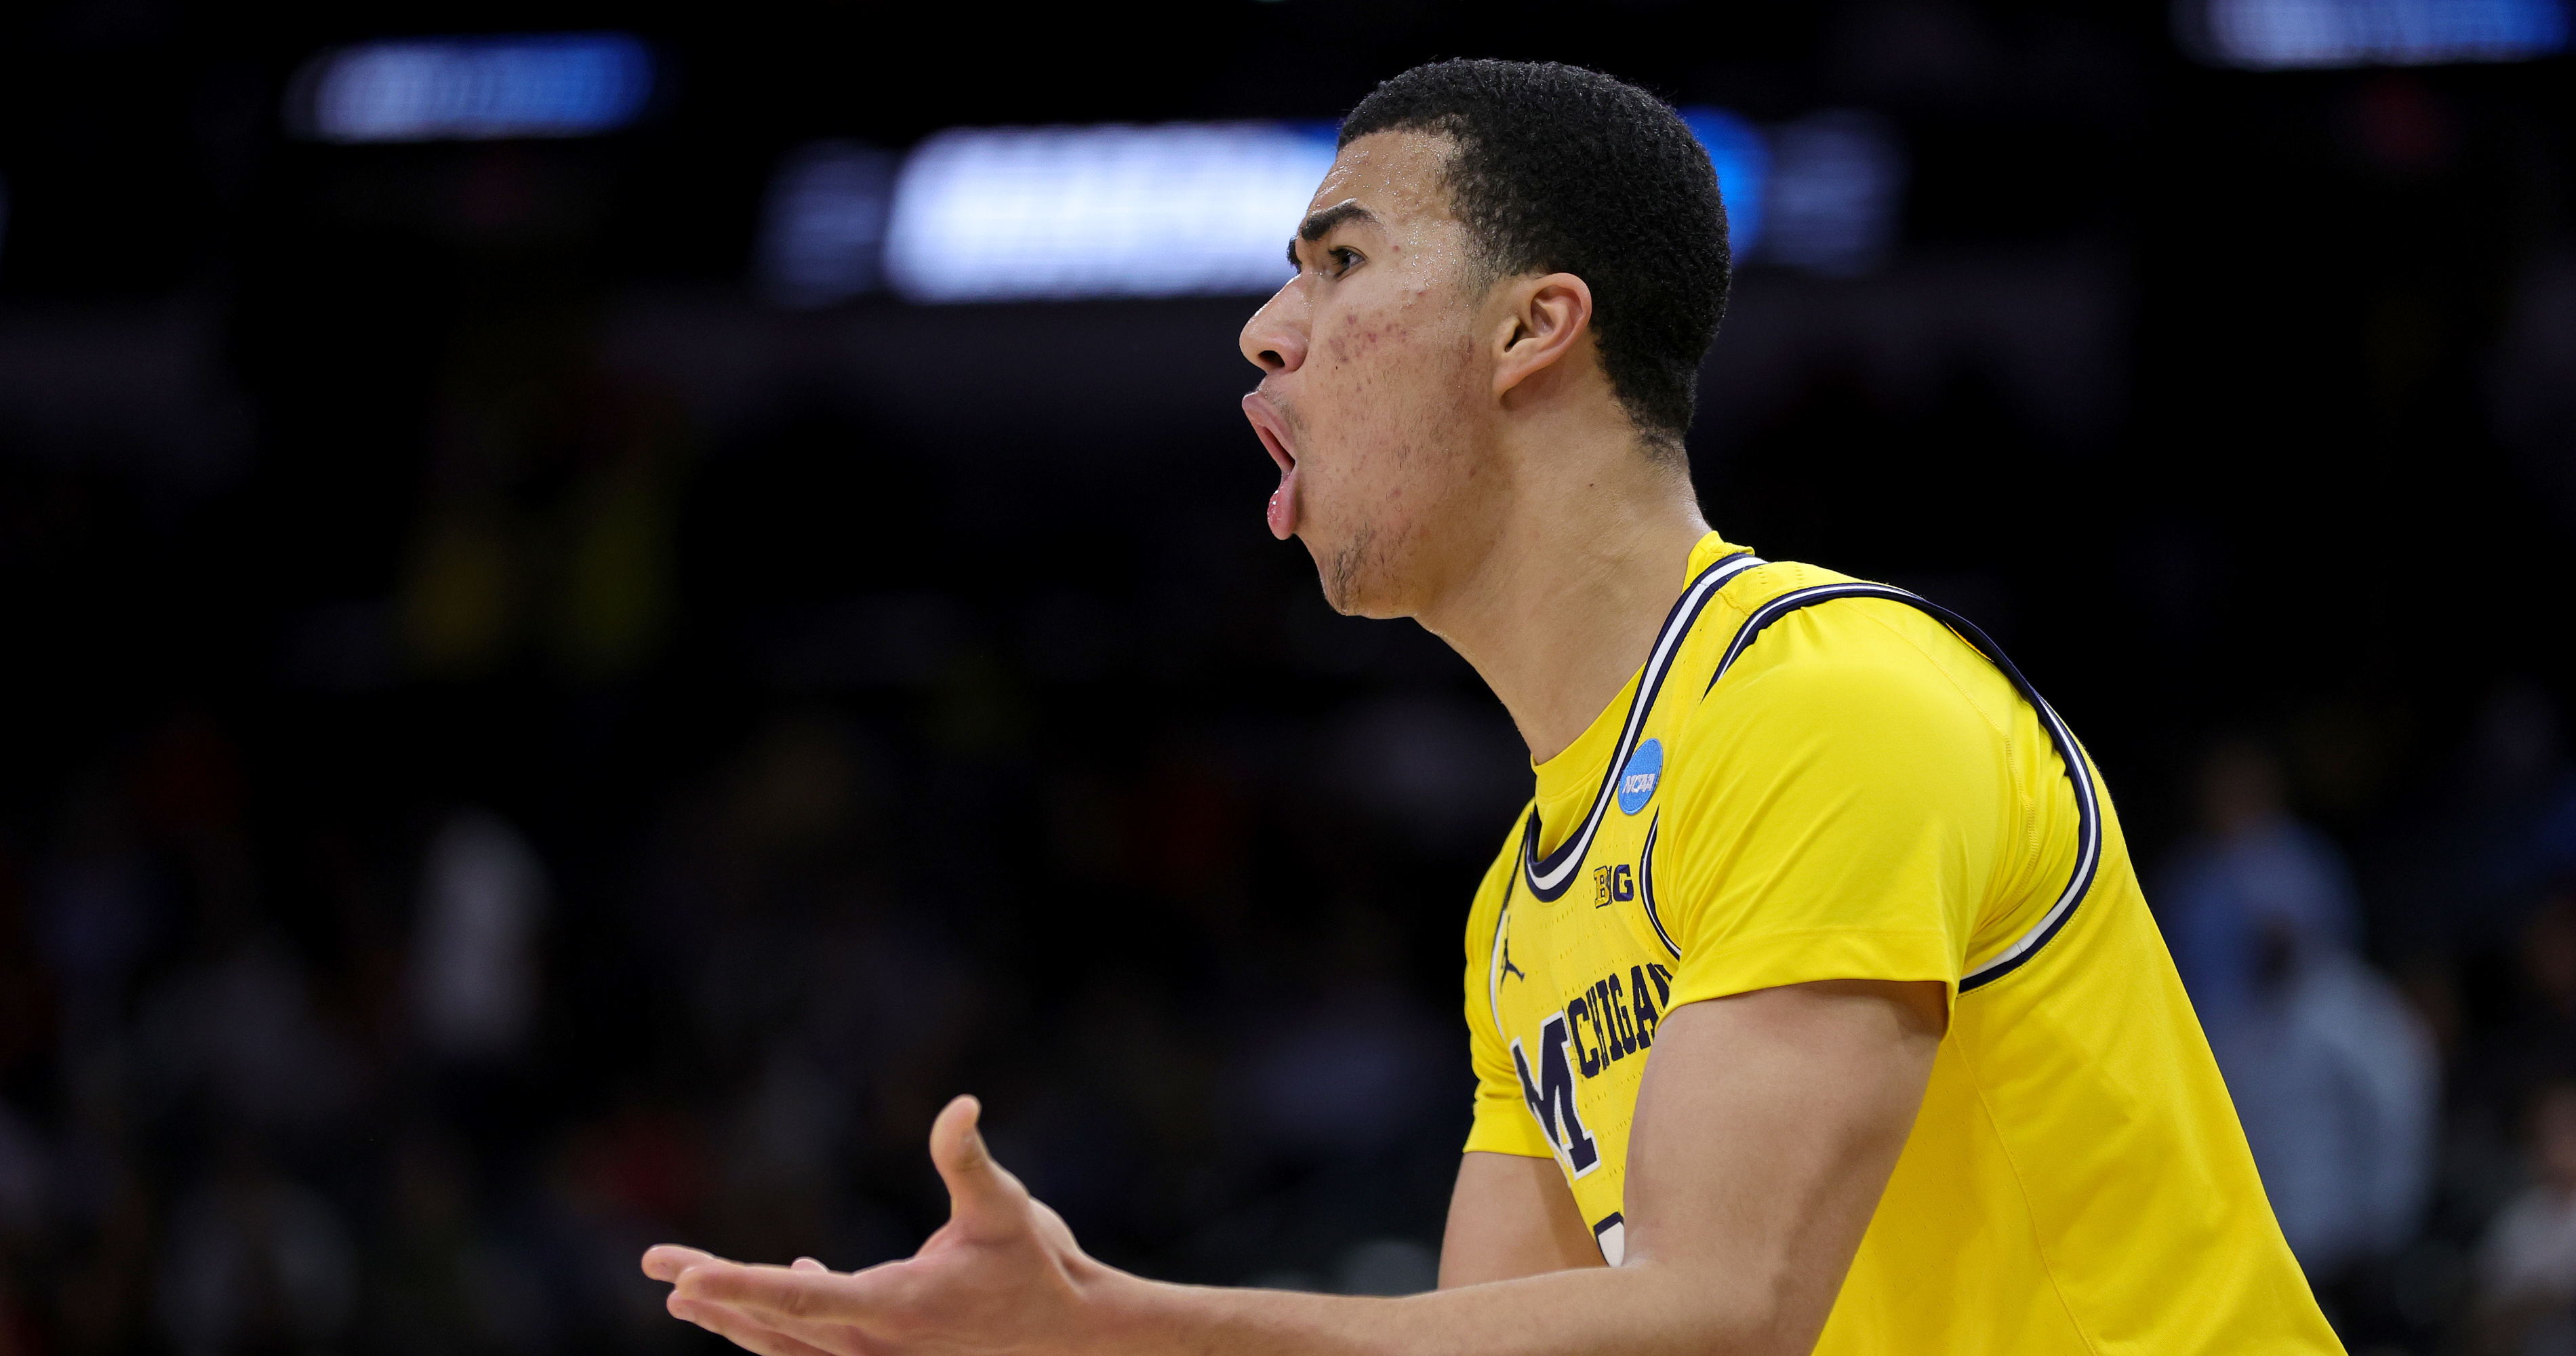 Michigan basketball's Caleb Houstan gets drafted by the Magic